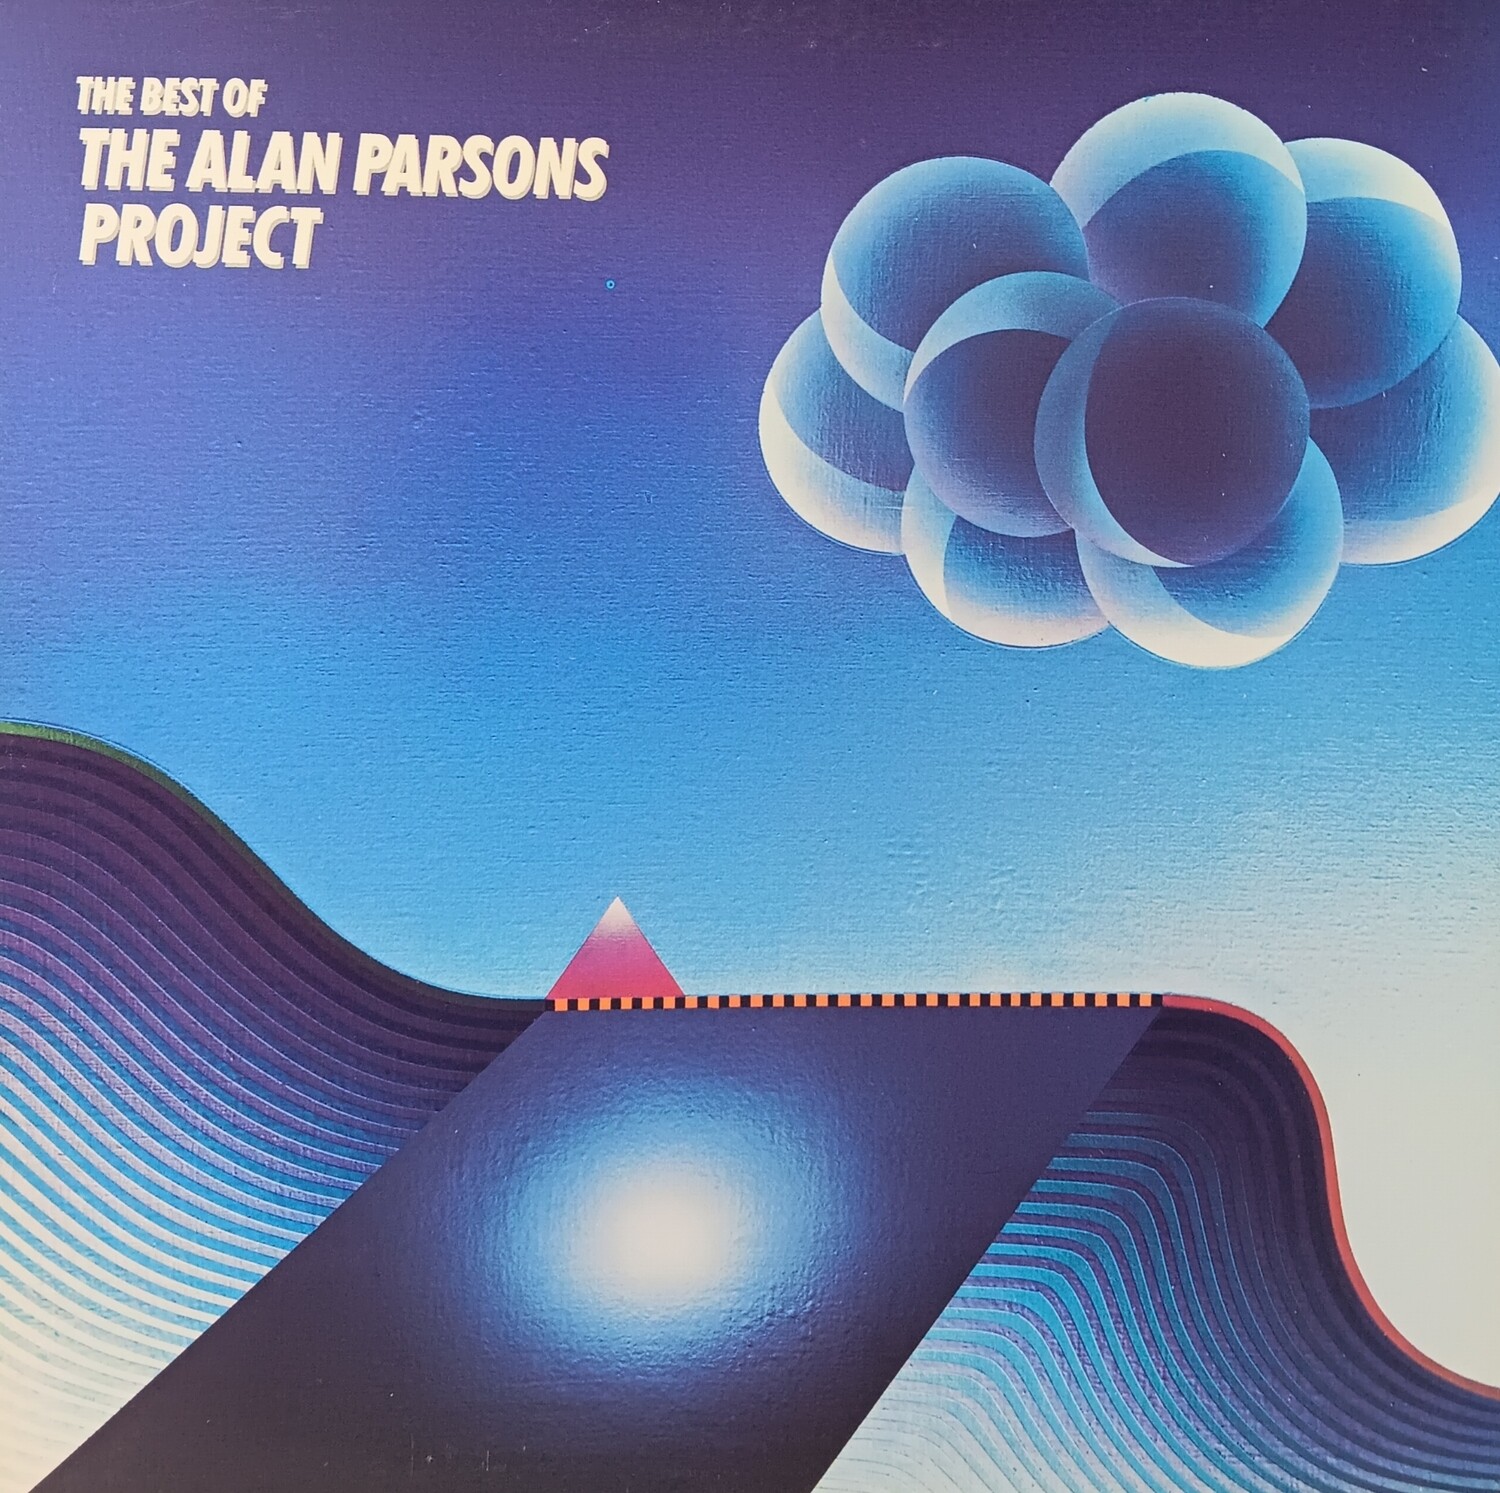 THE ALAN PARSONS PROJECT - The Best of The Alan Parsons Project